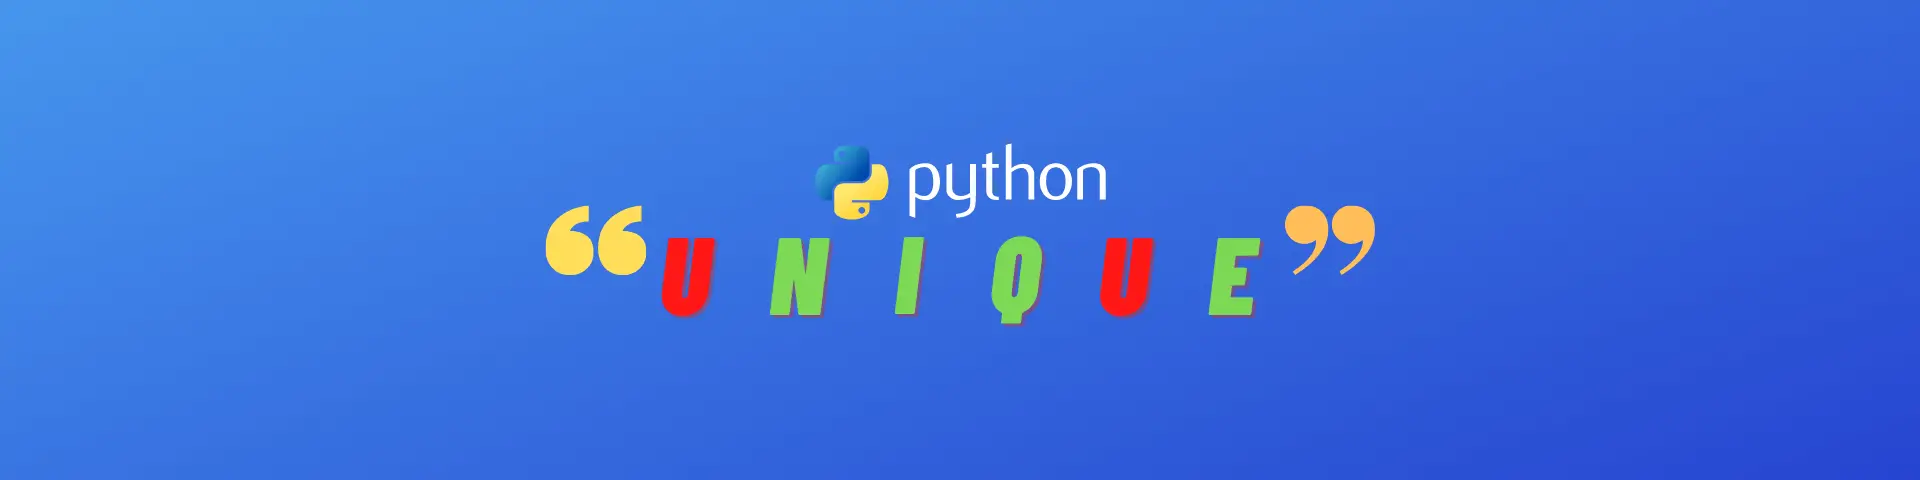 Get unique characters in a Python string